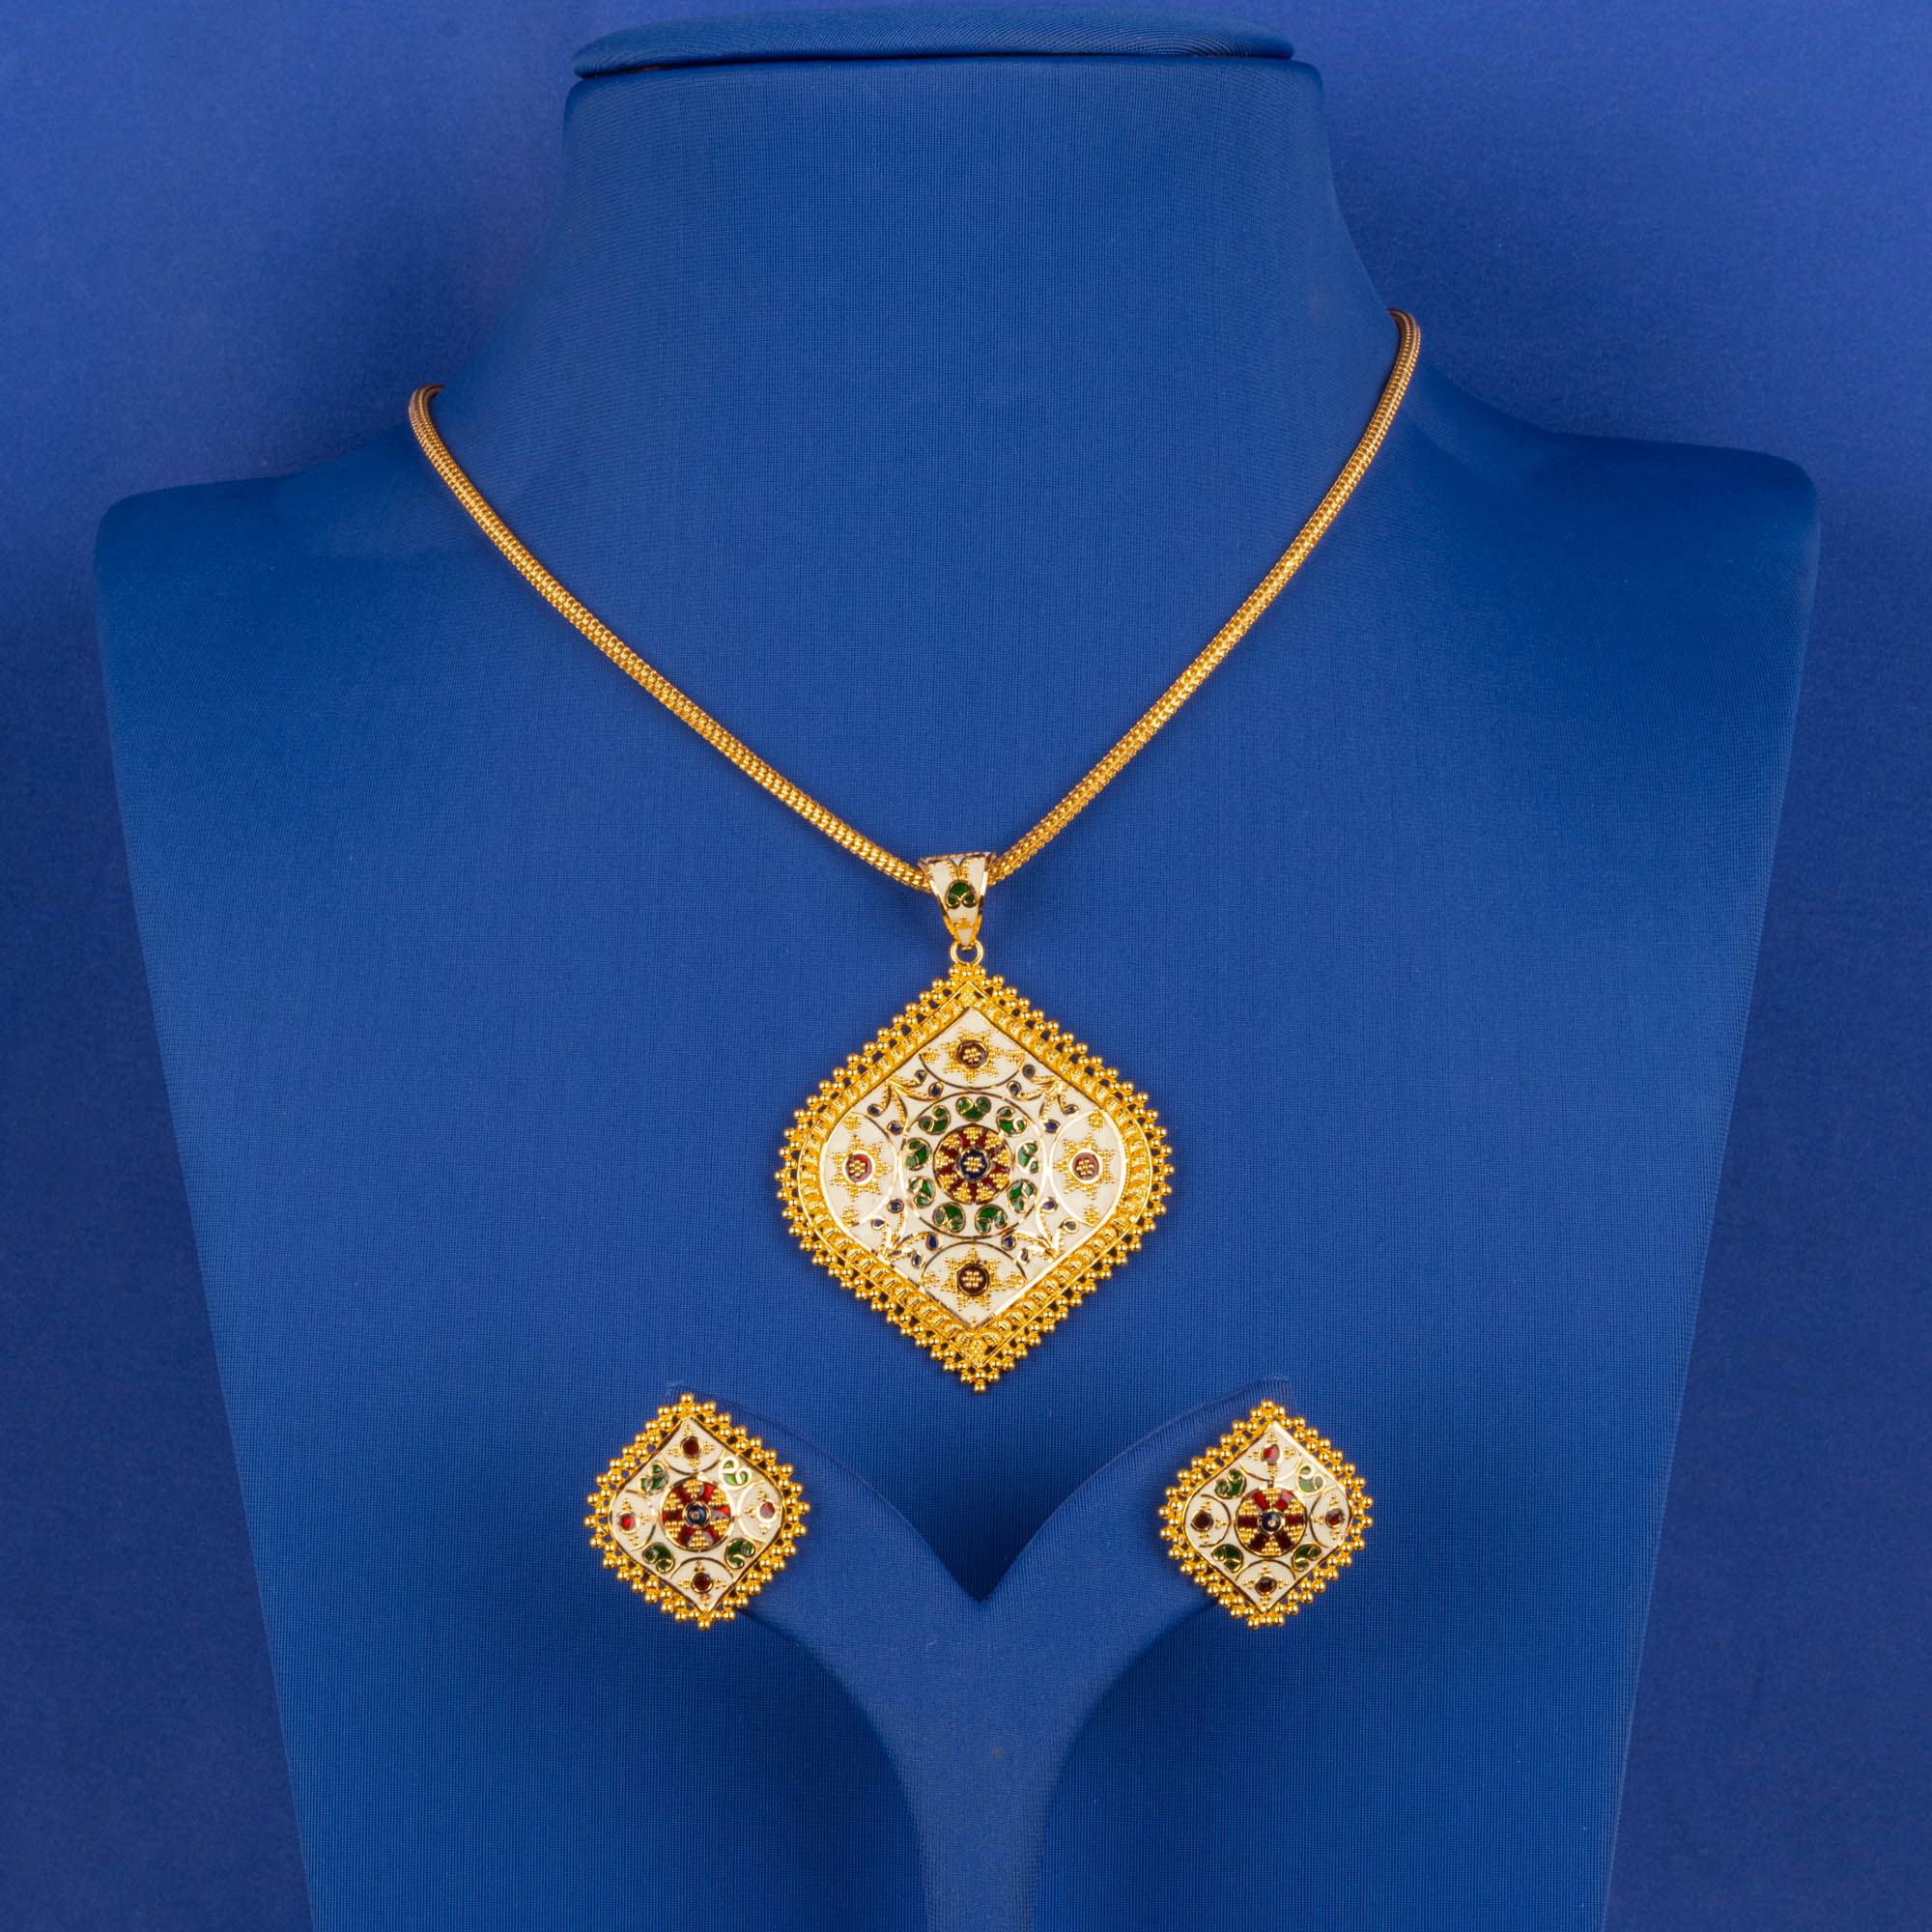 Timeless Treasures: Handmade 22K Gold Pendant and Earrings Set (chain not included)